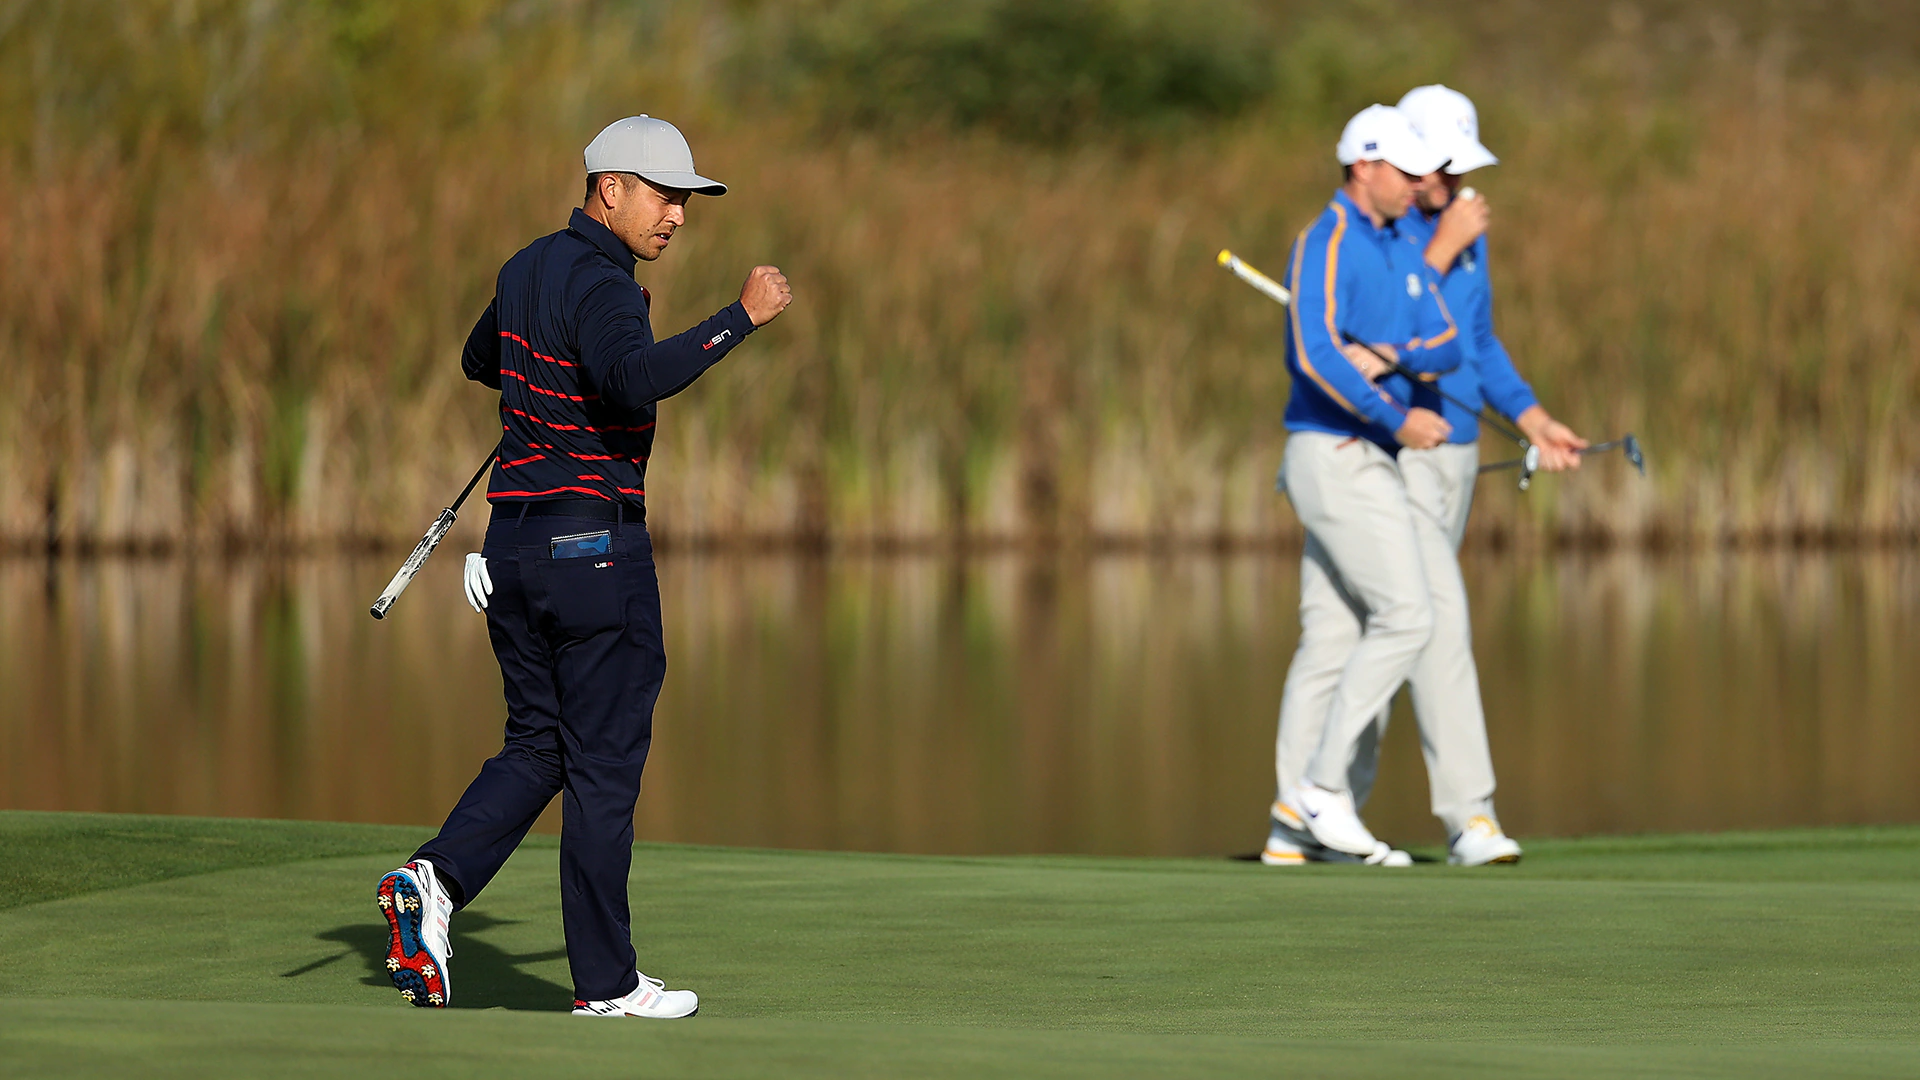 2020 Ryder Cup recaps: U.S. takes 3-1 lead after Friday foursomes